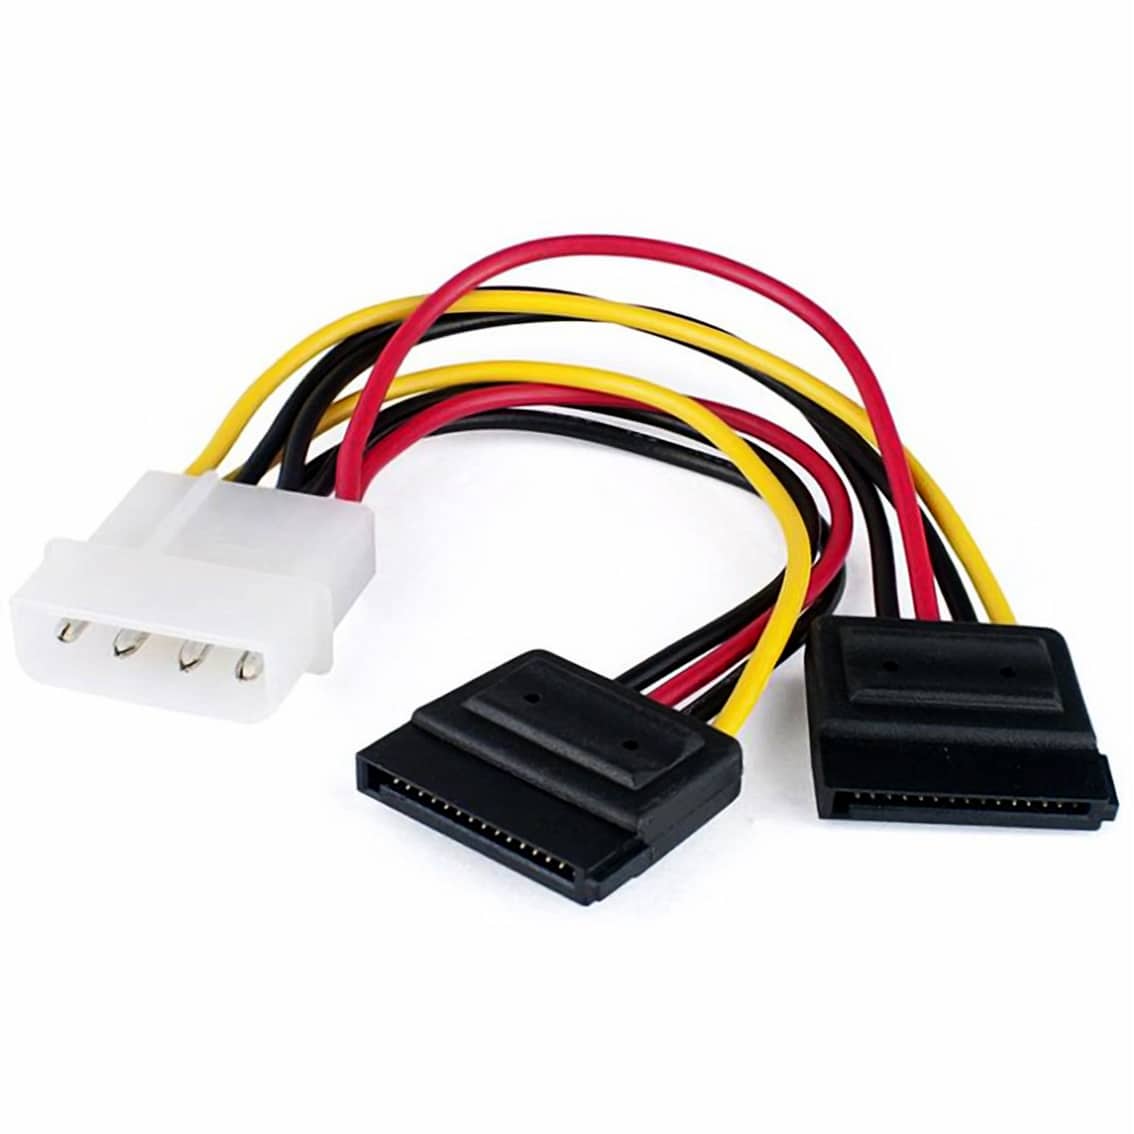 4 Pin Ide Molex Male To Double 15 Pin Sata Female Adapter Cable Pack